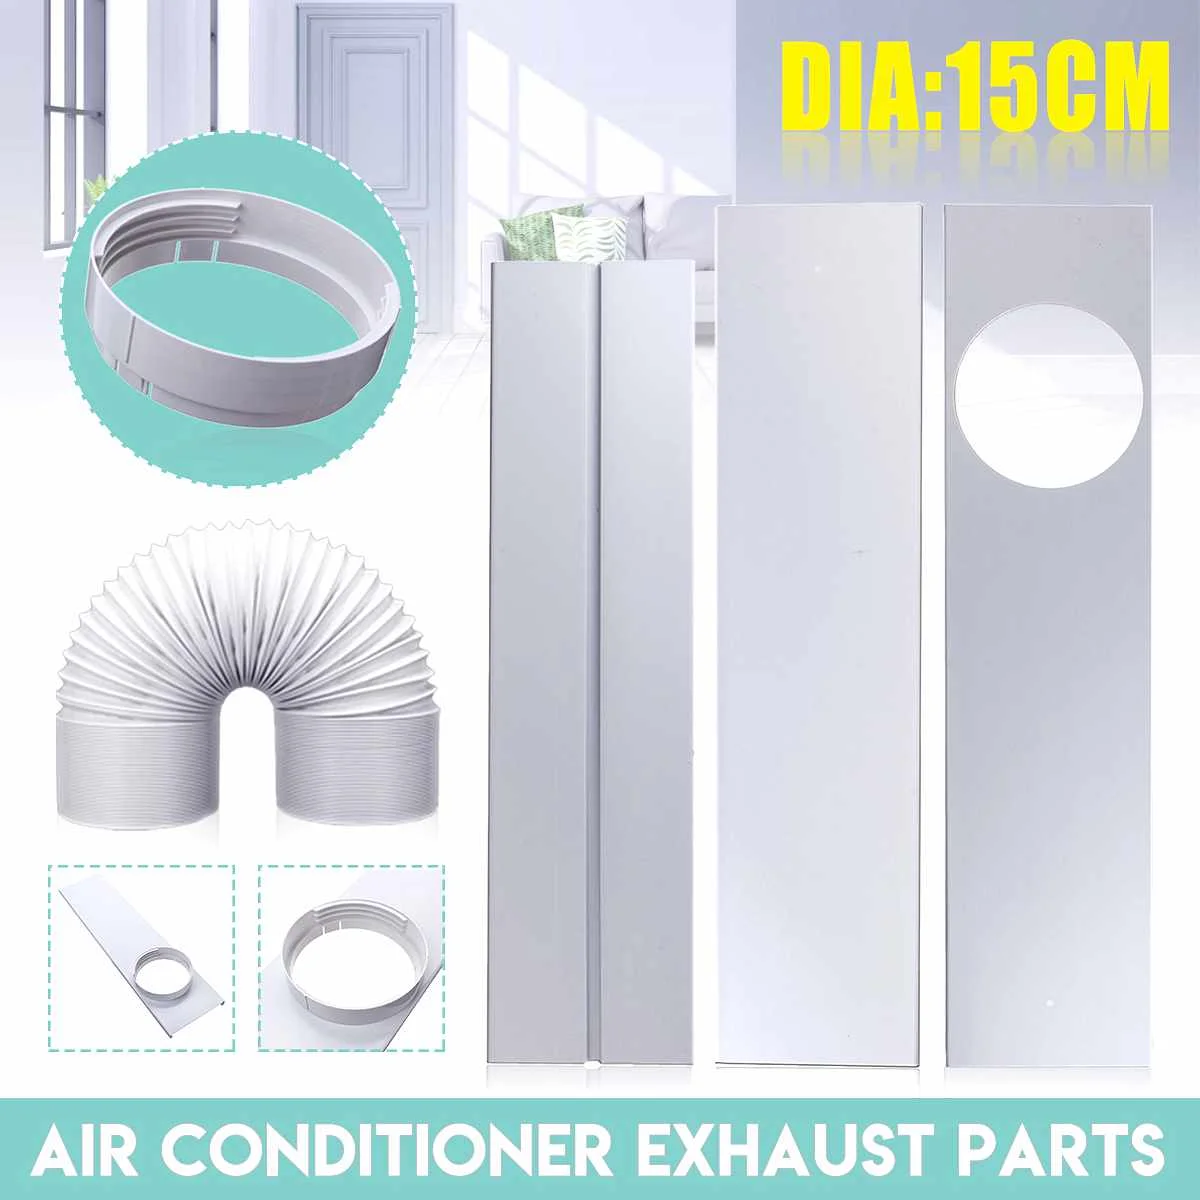 

Portable Air Conditioner Window Seal Air Vent Exhaust Slide Plate Dia 15cm Window Adaptor Pipe Hose Air Conditioner Accessories